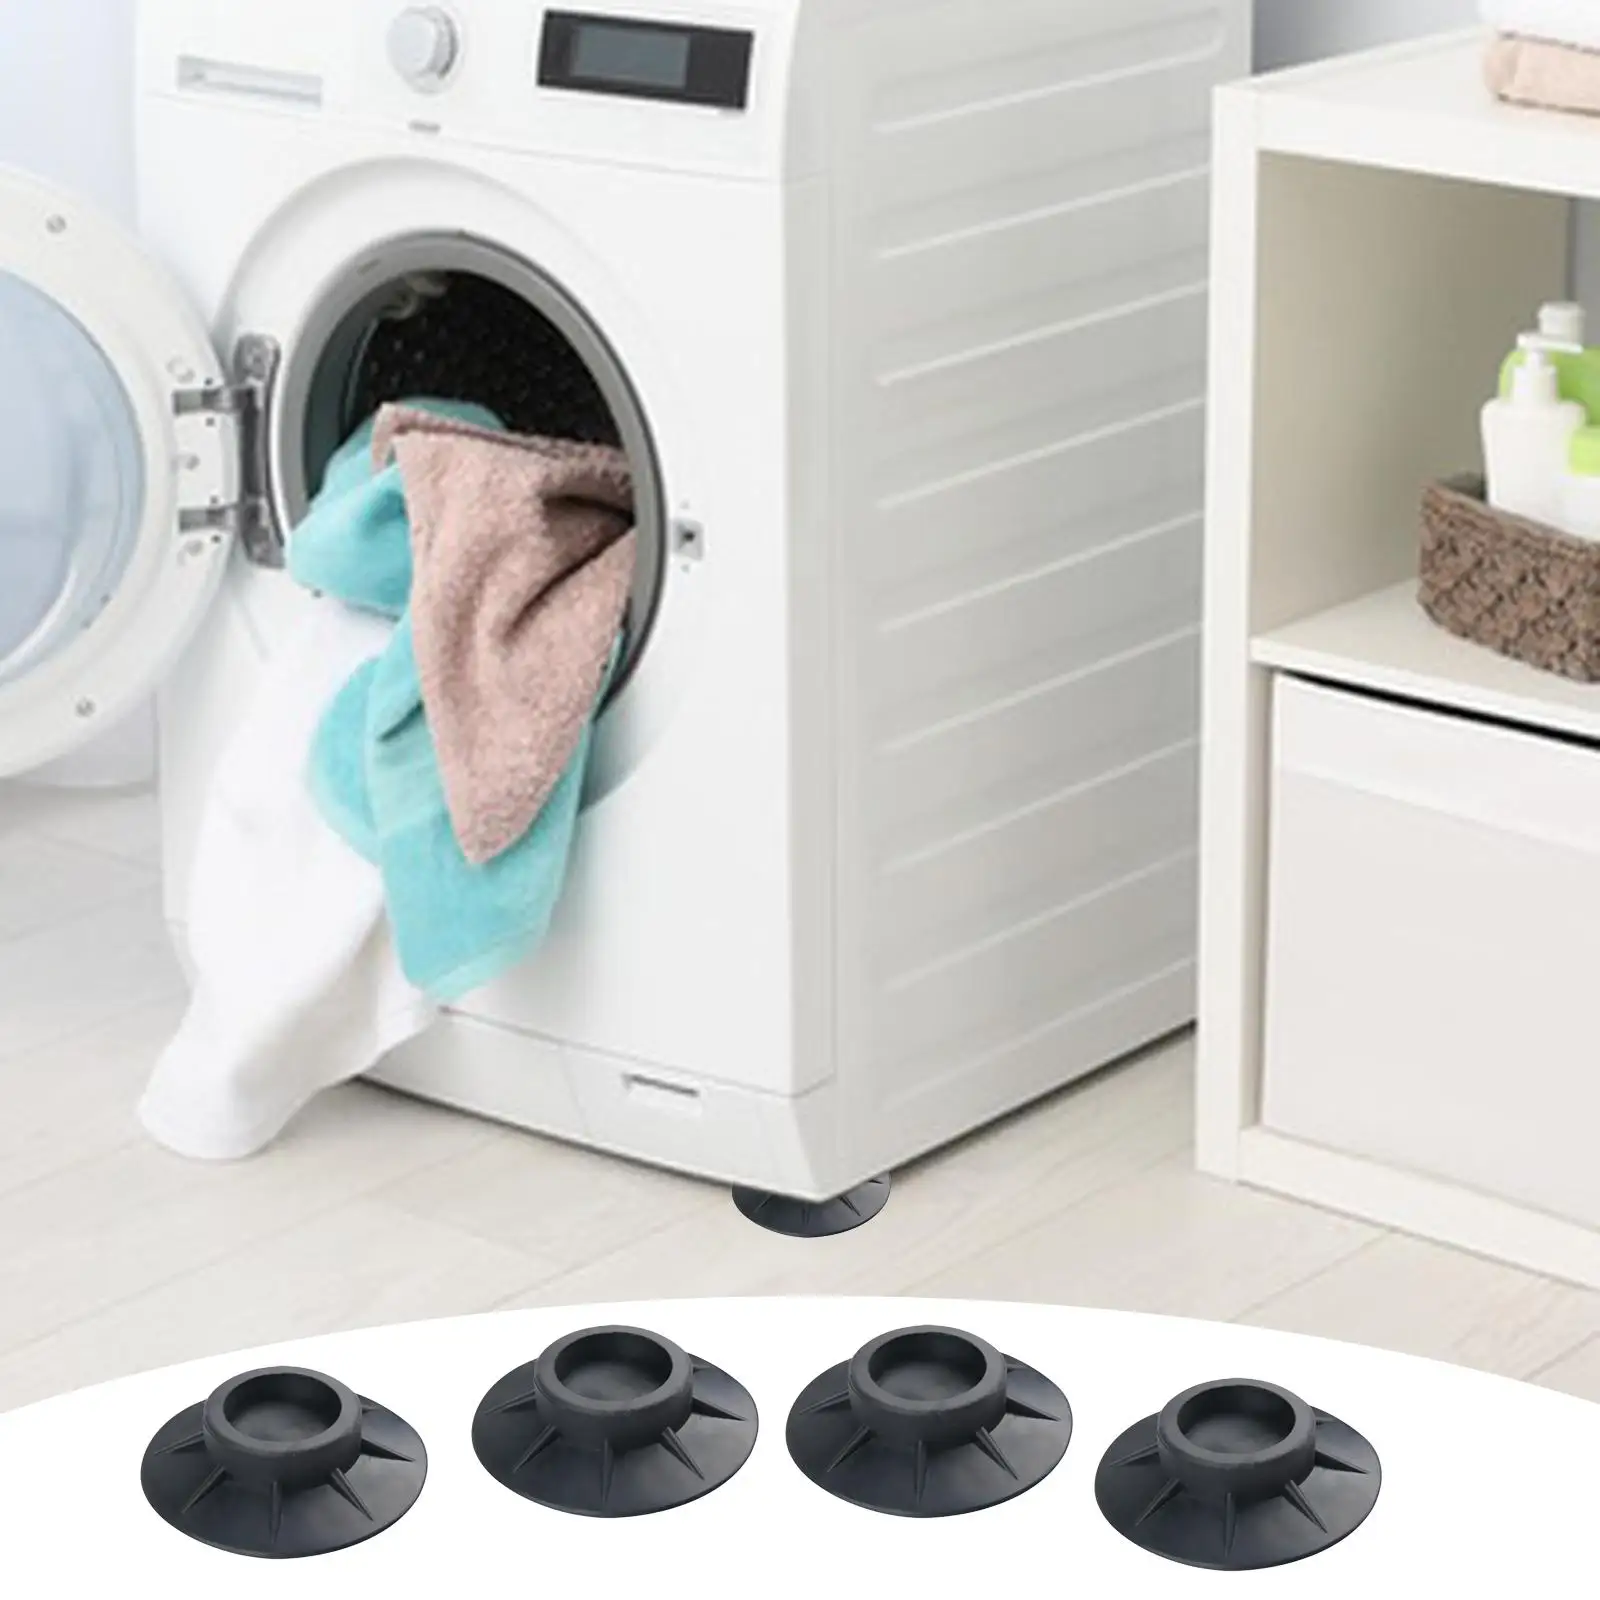 Set of 4 Anitivibration Pad Silent Washers Moisture Mats Protects Laundry Room Floor Stand Dryer Pedestals for Refrigerator